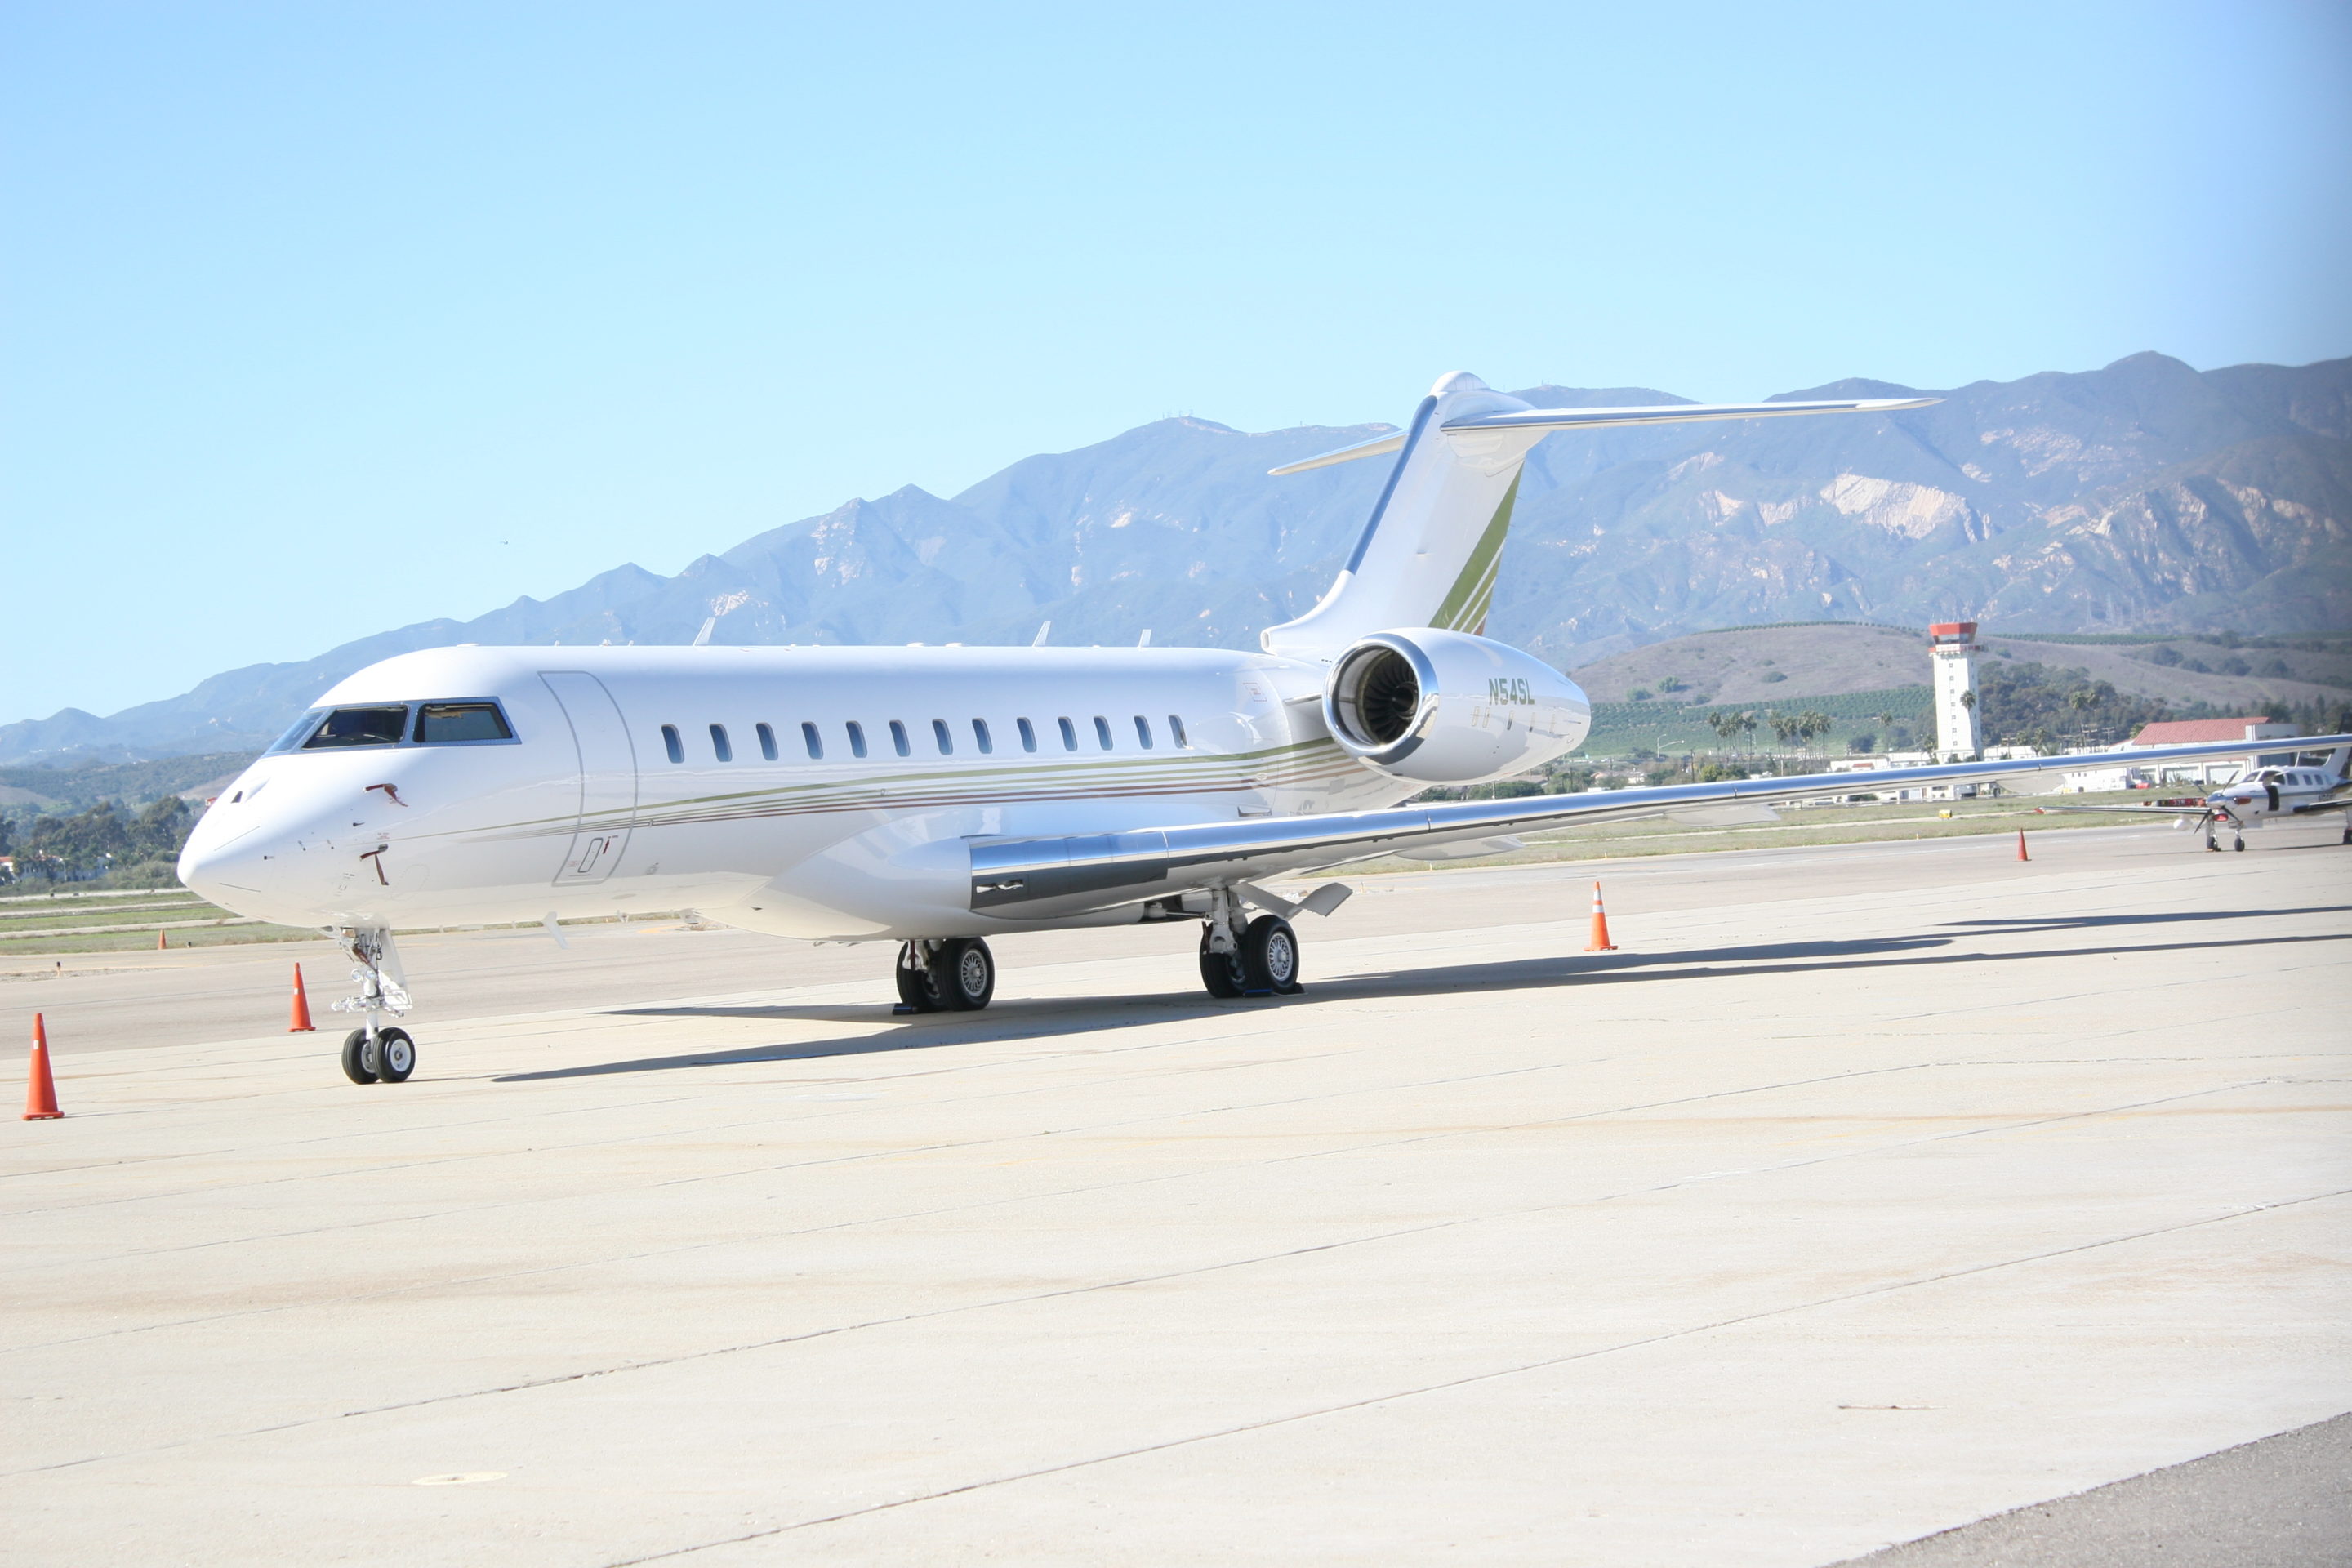 jet expenses, gulfstream g450, gulfstream g450 price, cost of owning a private jet, g450, g4 plane, g4 jet, gulfstream price, gulfstream g650 price, g450 price, how much does it cost to run a private jet, how much does it cost to own a private jet, gulfstream g450 jet price, the cost of owning a private jet, gulfstream g4, g650 price, private jet cost to own, g4 plane price, gulfstream g550 price, g5 jet price, g4 jet price, private jet annual maintenance cost, how much to operate a private jet, g5 jet, gulfstream cost, g6 jet price, g6 plane price, private jet crew cost, g 450, g450 plane, cost to maintain private jet, how much does a gulfstream g450 cost, g4 airplane, private jet maintenance cost, g450 jet price, gulfstream g450 rance, how much does it cost to fuel a private jet, gulfstream g4 price, gulfstream jet cost, g5 jet cost, private jet operating costs, how much does a g5 cost, g5 plane, gulfstream 4, gulfstream iv operating cost, gulfstream jet price, gulfstream g650 cost, how much to run a private jet, gulfstream g550 operating cost, giv x g450 how much does a gulfstream cost, cost of jet ownership, how much is a g5 jet, how much is a g5, learjet costof ownership, g450 range, g6 private jet cost, gulfstream 5 price tag, cost of owning a jet, how much is a g6 jet, gulfstream g550 cost, g550 cost, private jet expenses, gulfstream g5 price, g550 price, g5 airplane cost, gulfstream lane price, g5 cost, g6 plane, how much is a new gulfstream g550, how much does a g5 private jet cost, how much cost to own a private jet, g5 cost, private jet service cost, g5 plane price, gulfstream g450 interior, g450 cost, how much is it to buy a private jet, g450 price new, how much does it cost to operate a private jet, g4 jet cost, g450 et, how much does a jet cost to buy, g450 private jet, gulfstream g500 operating costs, g4 private jet price, g4 airplane cost, g6 airplane price, gulfstream g450 cost, gulfstream g55, how much does it cost to maintain a private jet, how much does it cost to maintain a private jet, how much does a g6 cost, gulfstream g450 cost, fulgstream g450 cost per hour, gulfstream cost of ownership, gulfstream g450 price new, g4 plane cost, how much is a gulfstream 6, how much does a g4 cost, how much does a g6 jet cost, g5 cost per hour, g6 plane cost, how much is a g4 jet, private jet ownership cost, gulfstream v, gulfstream g550 operating cost, private jet operating cost, best private jets 2017, citation jet cost per hou, private jet fuel, cessna citation cost per hour, honda jet price, honda jet for sale, honda jet cost, honda jet cost per hour, how much does a honda jet cost, private jet operating costs, how much is a honda jet, private jet cost, honda jet, honda light jet cost, honda jet operating cost, honda jet msrp, cost of owning a jet, how much does the honda jet cost, honda jet price uk, cost of new honda jet, honda ha 420 hondajet price, cost jet, honda vli price, new honda jet price, honda jet price 2017, how much to operate a private jet, honda plane price, honda private jet, how much is a jet ski, jet ski cost, how much does a jet ski cost, average jet ski price, how much jet ski cost, cost of owning a jet ski, waverunner cost of ownership, how much does it cost to buy a jet ski, seadoo maintenance cost, how much to winterize a jet ski, jet ski cost of ownership, jet ski repair cost, jet ski maintenance, jet ski service, jet ski prices new, how much does it cost to winterize a jet ski, waverunner cost, how much is a waverunner, how much is a brand new jet ski, how mucch is a used jet ski, jet ski maintenance costs, jet ski service cost, jet ski cost to buy, how to maintain a jet ski, are jet skis worth it, how much does a jet ski engine cost, are jet skis worth the money, is buying a jet ski worth it, zetta jet cost, private jet charter cost, charter jet cost, private jet cost, charter plane cost, private jet rental cost, charter flight cost calculator, charter flight cost, private jet charter prices, how much is a private jet flight, how much to rent a private jet, how much does it cost to rent a private jet, how much to charter a jet, how much to charter a plane, how much is it to rent a private jet, charter jet prices, how much does it cost to charter a plane, private jet rental prices, private plane charter cost, plane cost, private jet charter cost estimator, private jet to las vegas cost, how much to charter a private jet to las vegas, how much does it cost to charter a jet, private flight cost, charter plane price, private jet flight cost, how much to charter a jet to vegas, how much to charter a private jet, how much does a private jet cost to rent, chartered flight price, private plane cost, how much does a charter flight cost, jet charter rates, how much to rent a jet, jet rental cost, how much does it cost to charter a small plane, charter airplane cost, private plane rental prices, how much it cost to rent a private jet, jet plane rental rates, private charter flights cost, cost of a private jet to rent, private jet cost estimator, private jet price flight,  jet hire cost, private jet to vegas cost, g4 plane rental cost, cost to charter private jet to hawaii, g5 jet, book a private plane cost, business jet charter prices, how much does it cost to charter a small jet, what does it cost to charter a private plane, new york new orleans san fancisco cleveland quote, how much is it to charter a private jet, charter plane la to vegas, private jet houston to las vegas price, how much does a private jet to vegas cost, private jet calculator, business jet rental prices